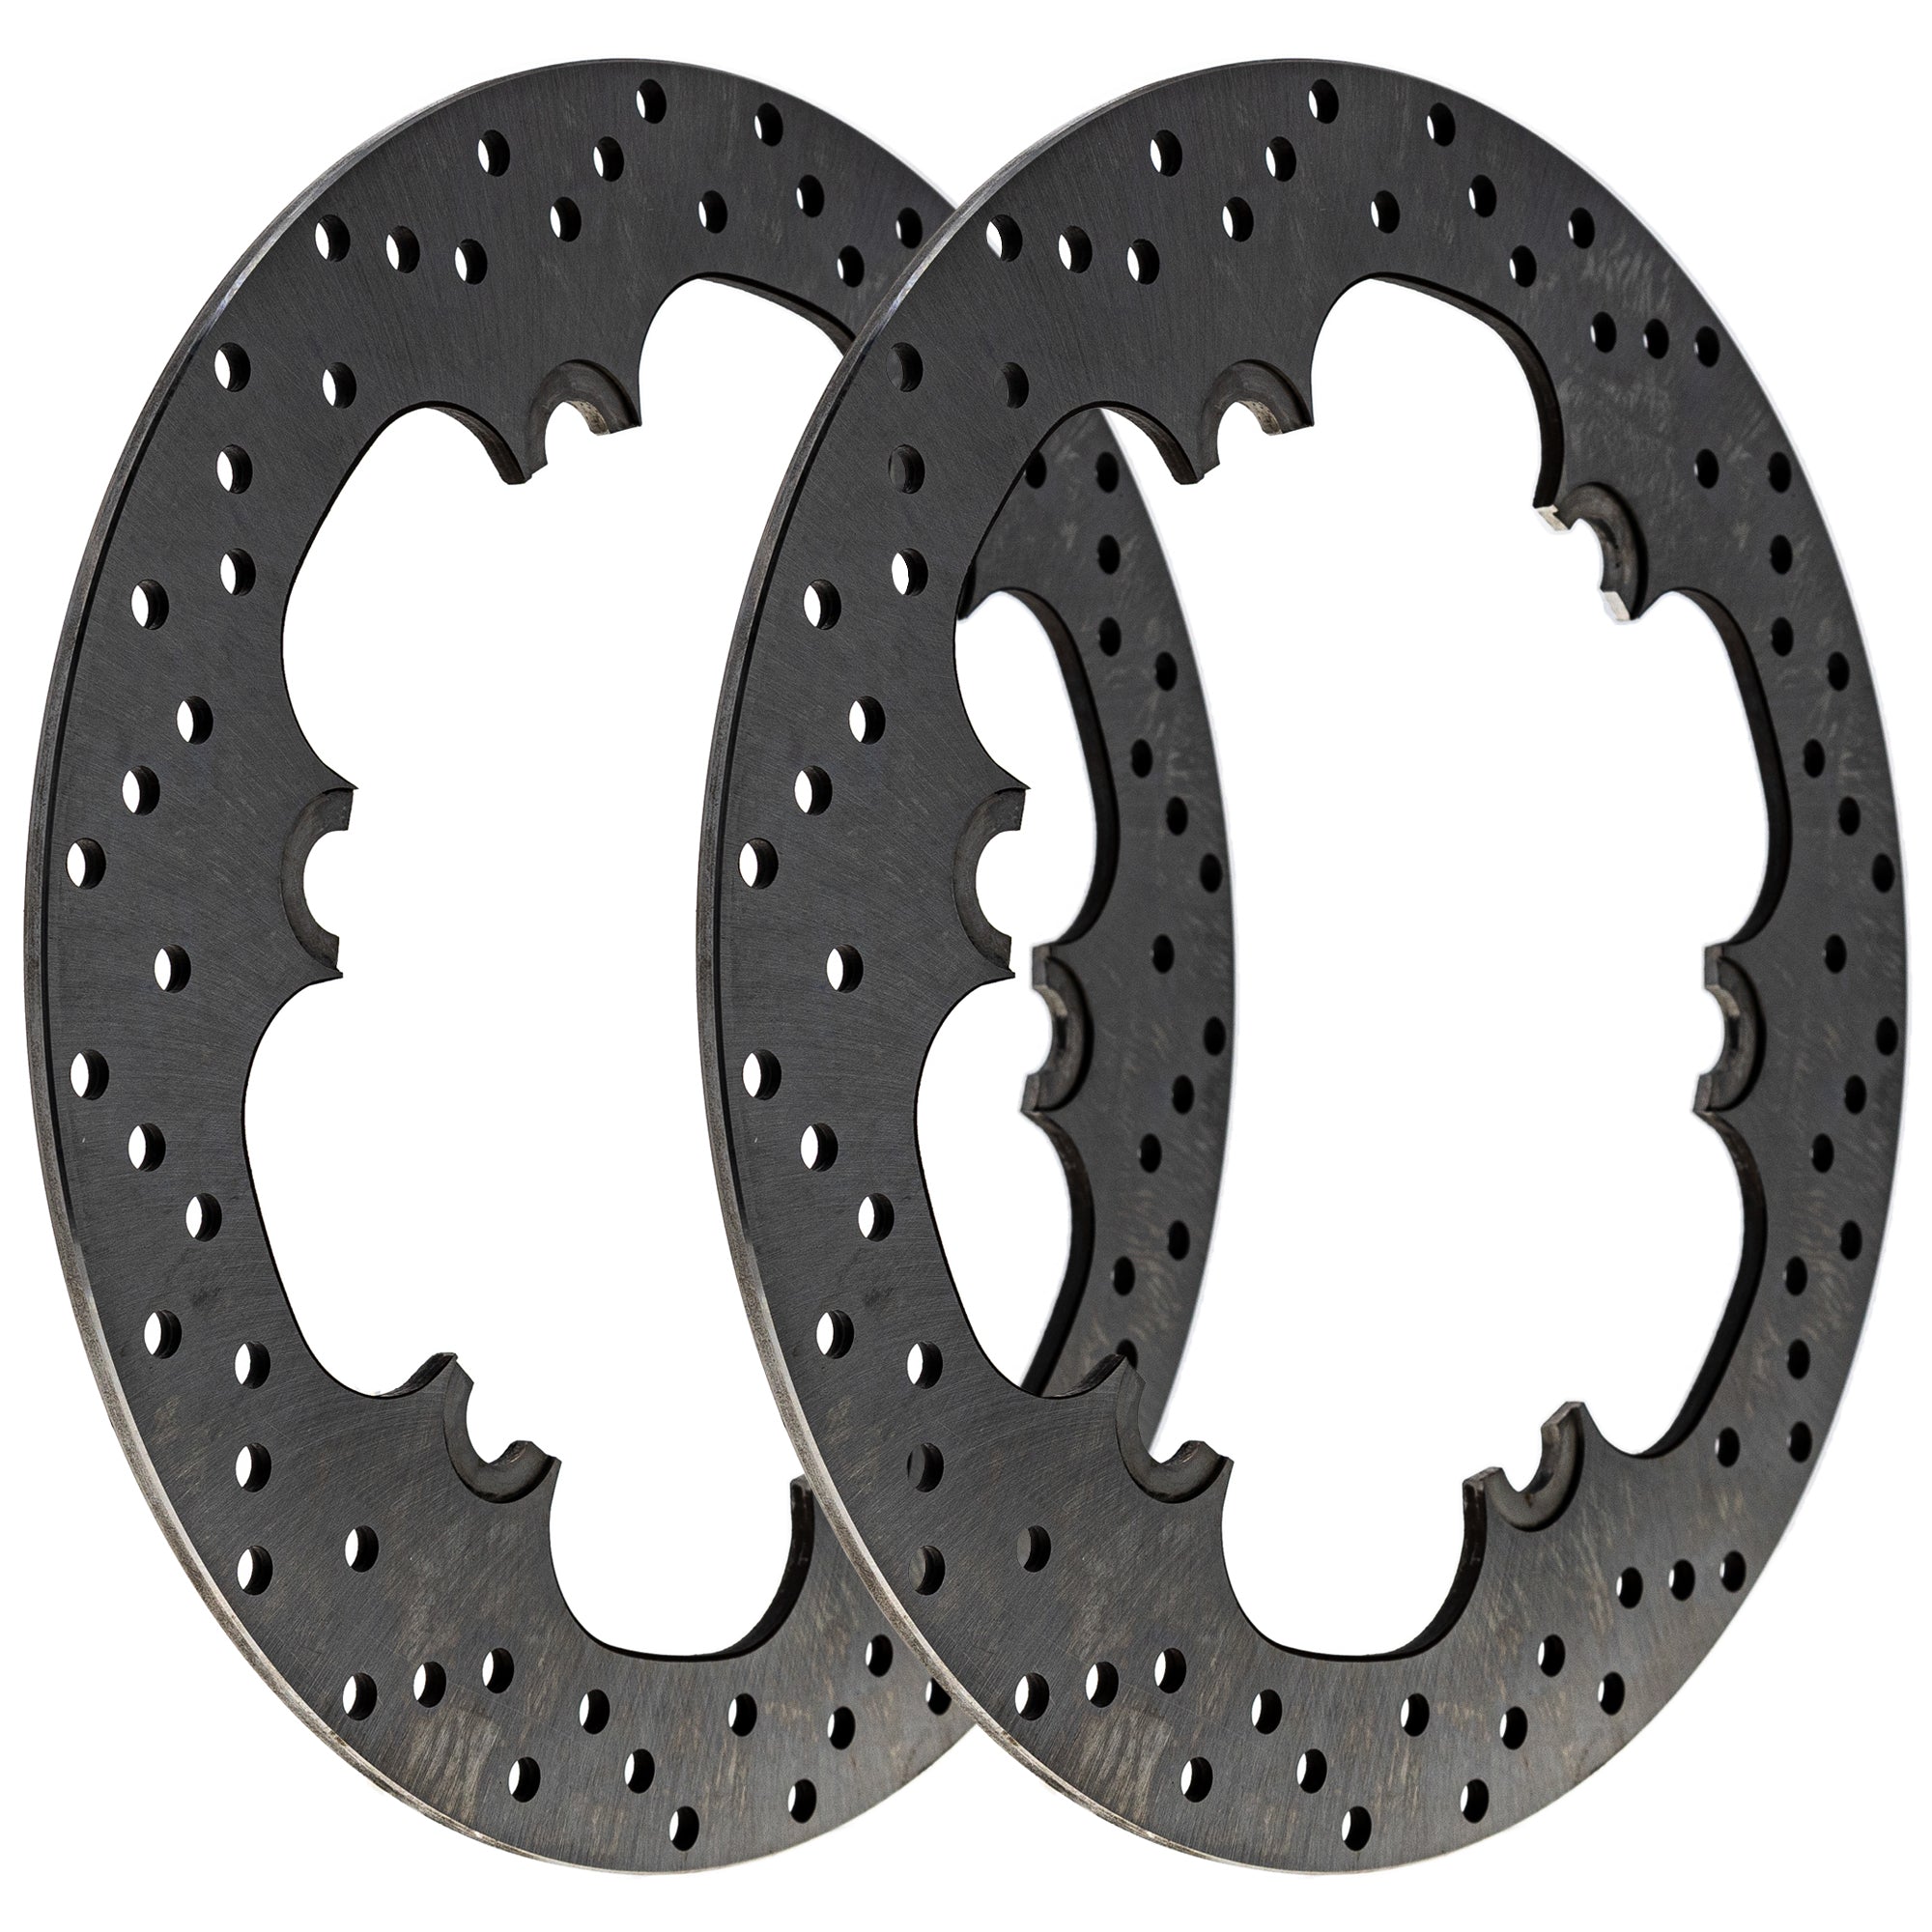 Front Brake Rotor 2-Pack for zOTHER Ninja NICHE 519-CRT2691R